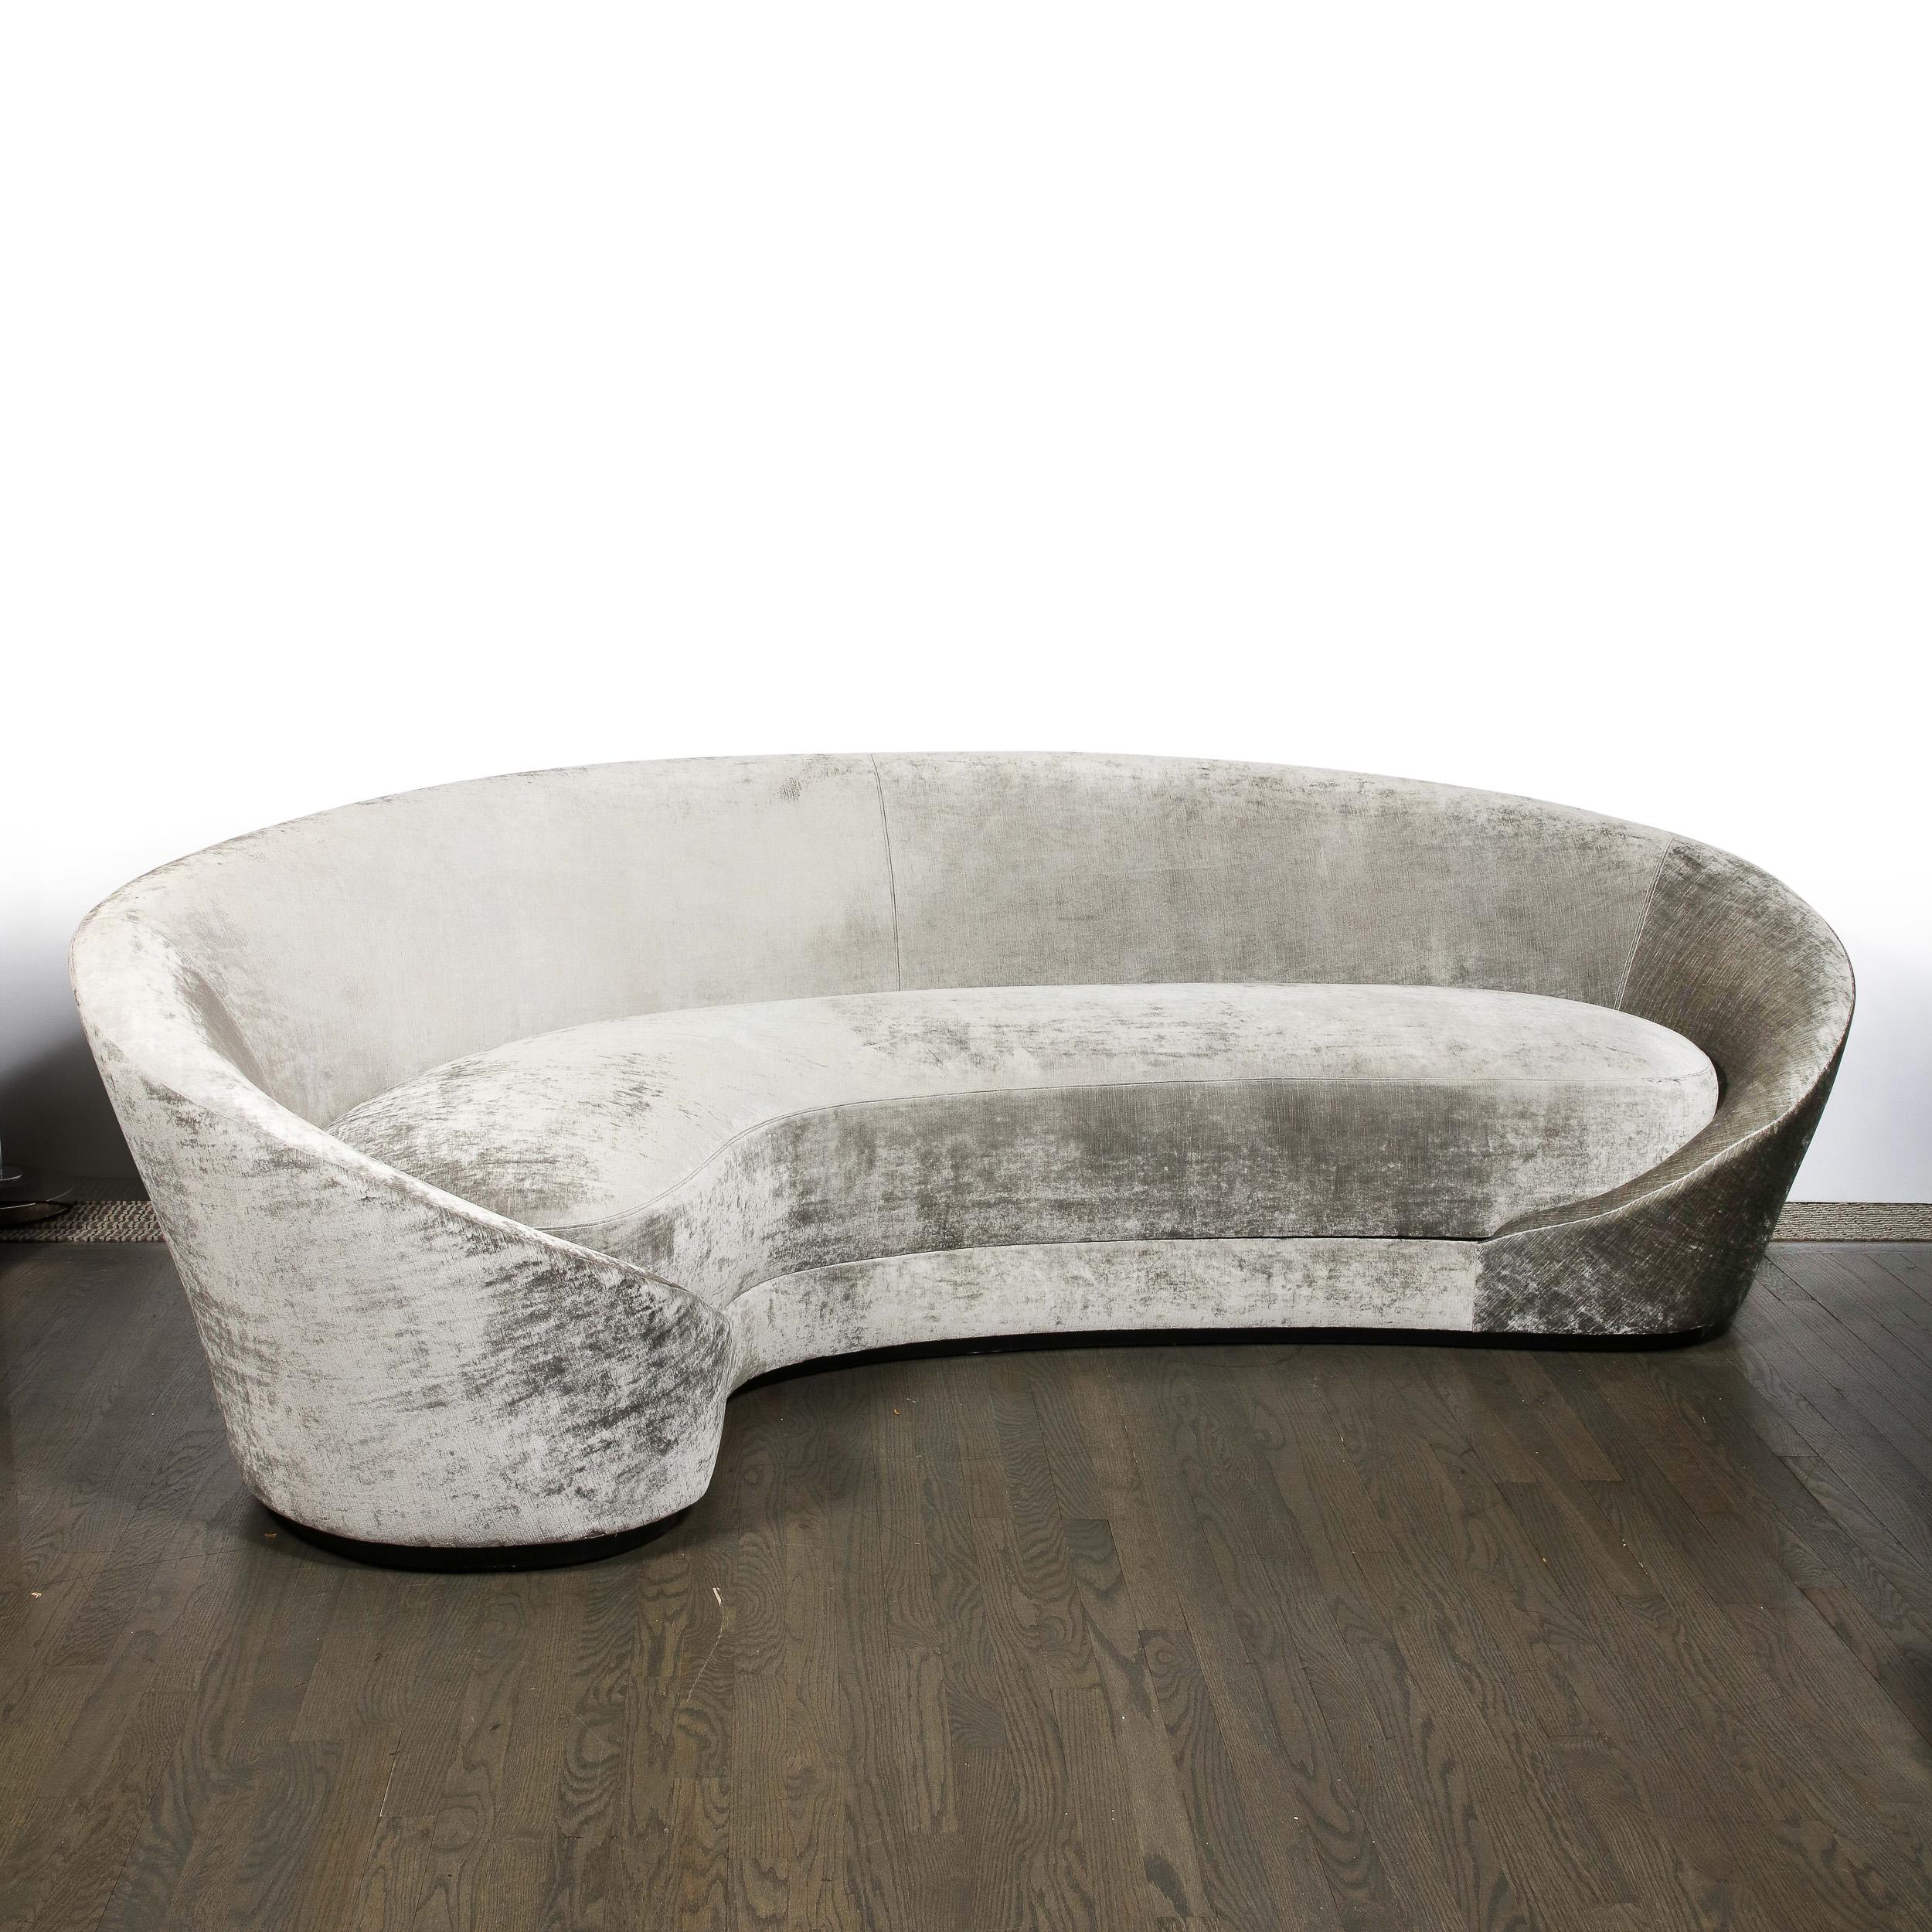 1940s Style Modernist Sweeping Curved Sofa in Platinum Velvet For Sale 7